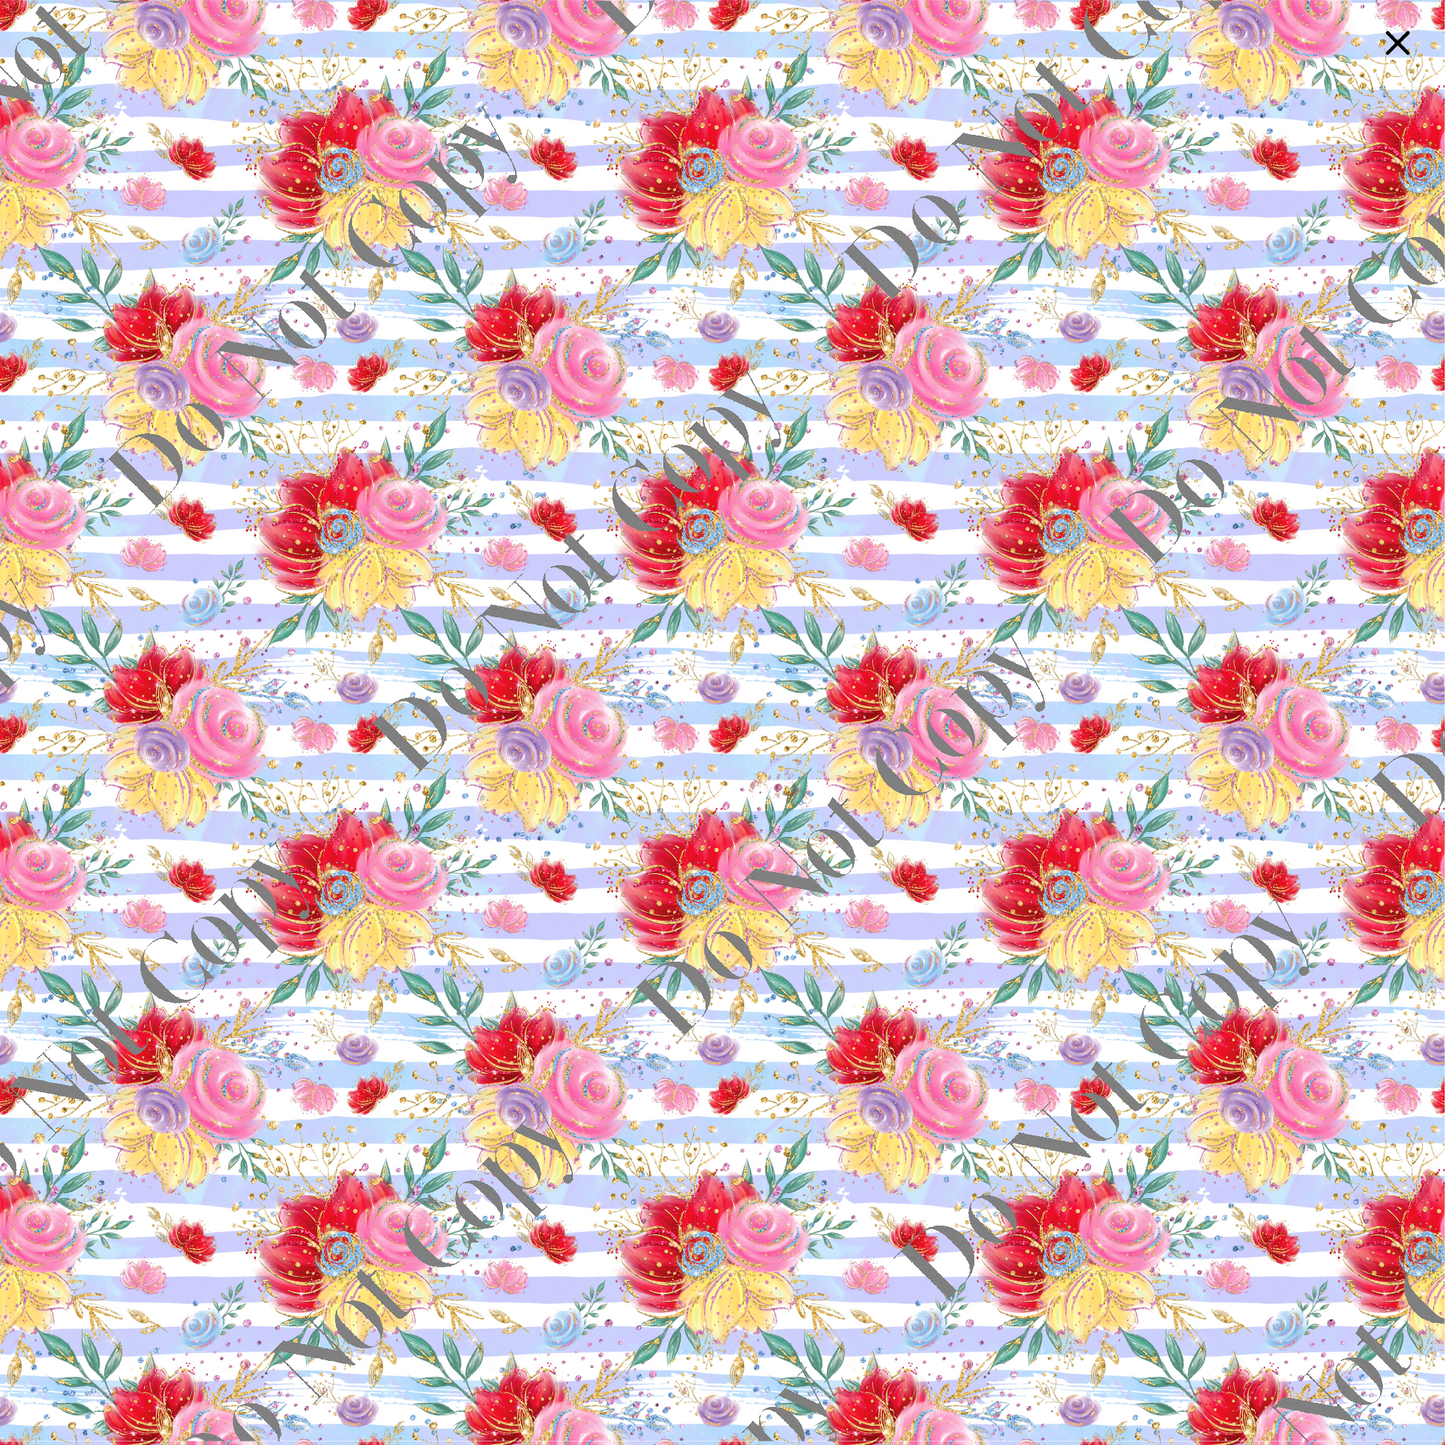 Patterned Vinyl - Red, Pink & Yellow Floral